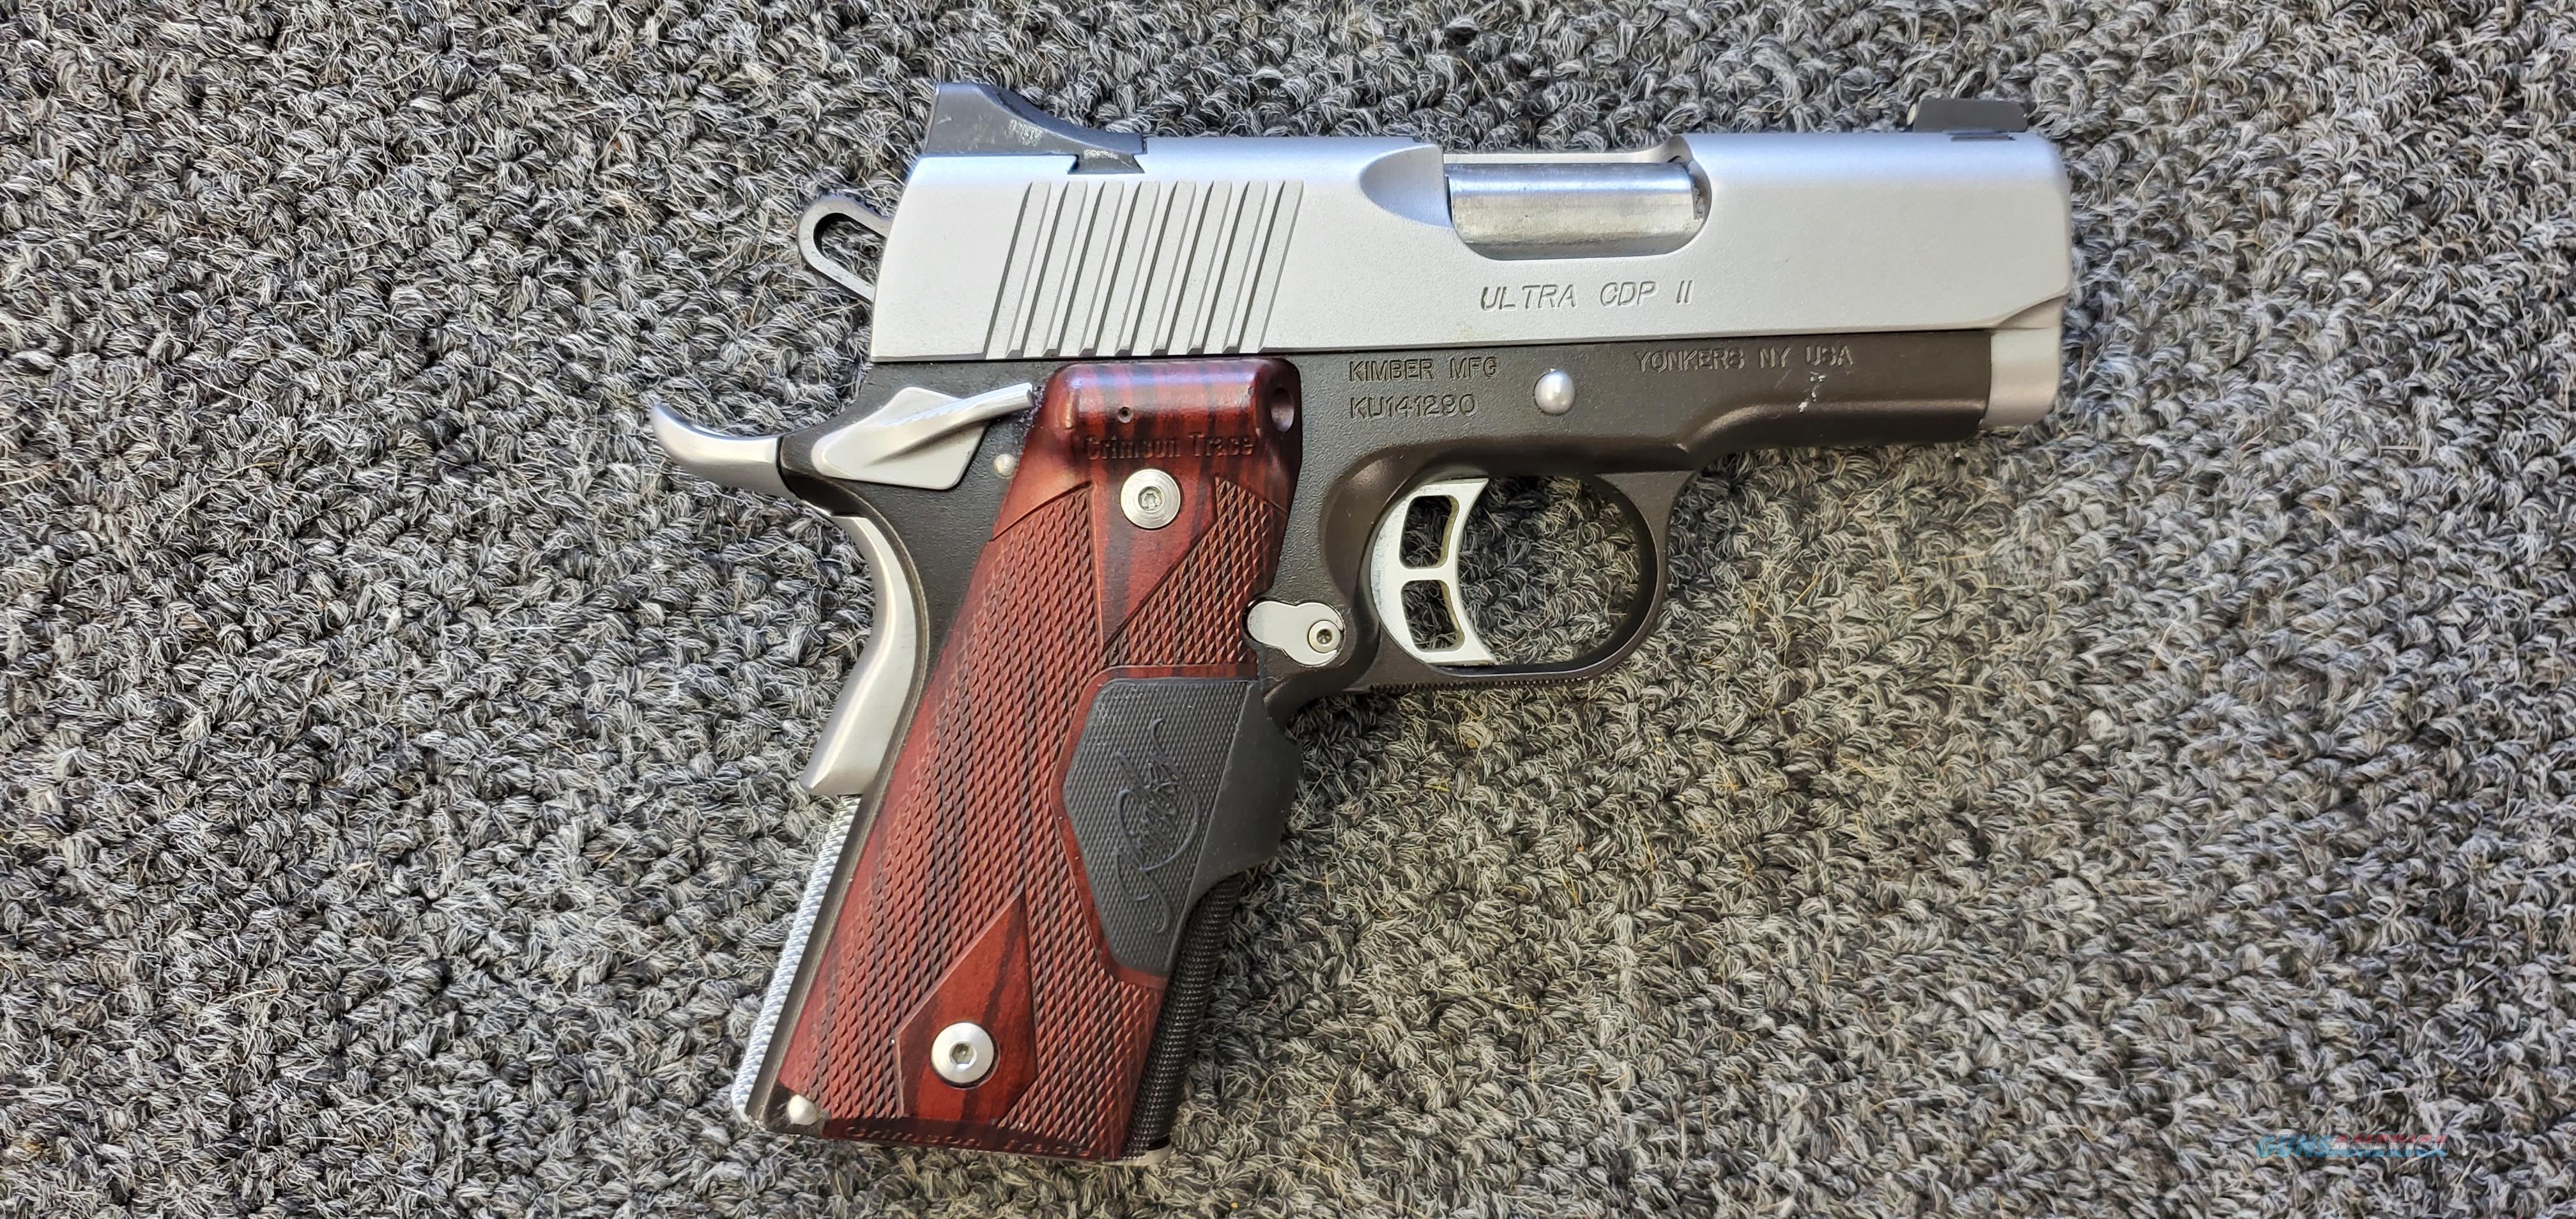 Kimber Ultra Cdp Ii 45acp With Crimson Trace R For Sale